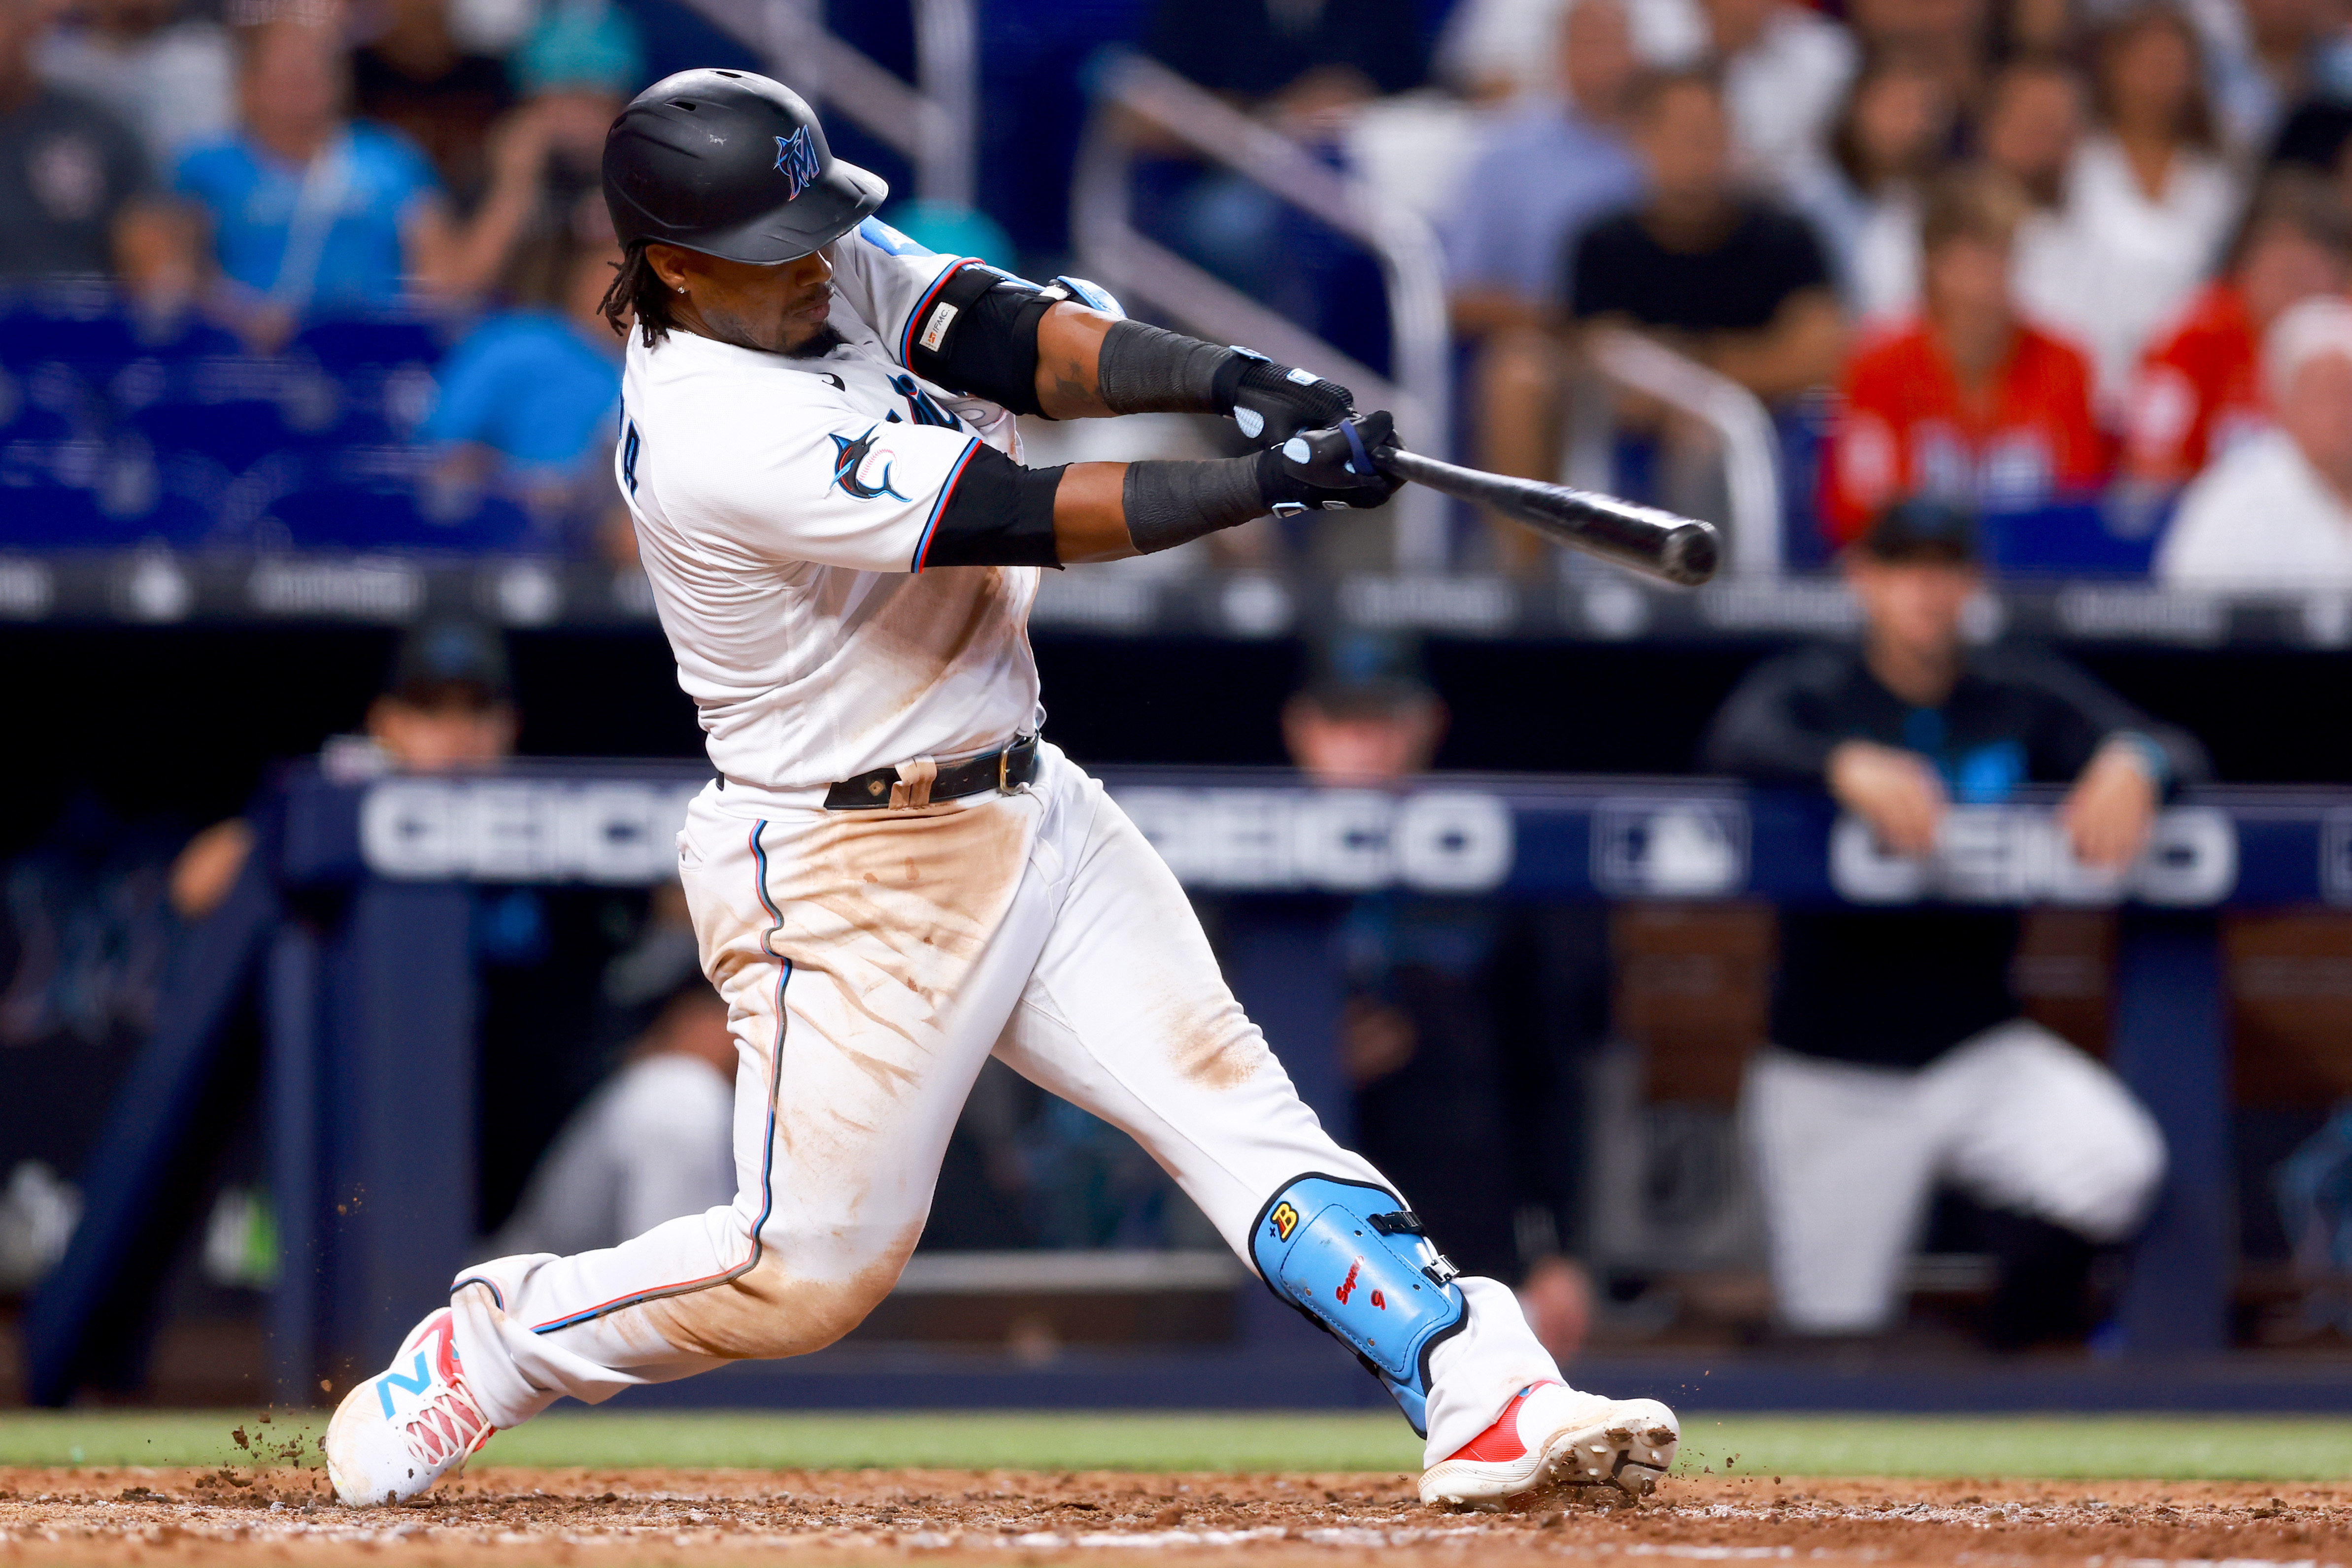 Cooper and Segura homer, López and Robertson play key roles as Marlins beat  Tigers 8-6